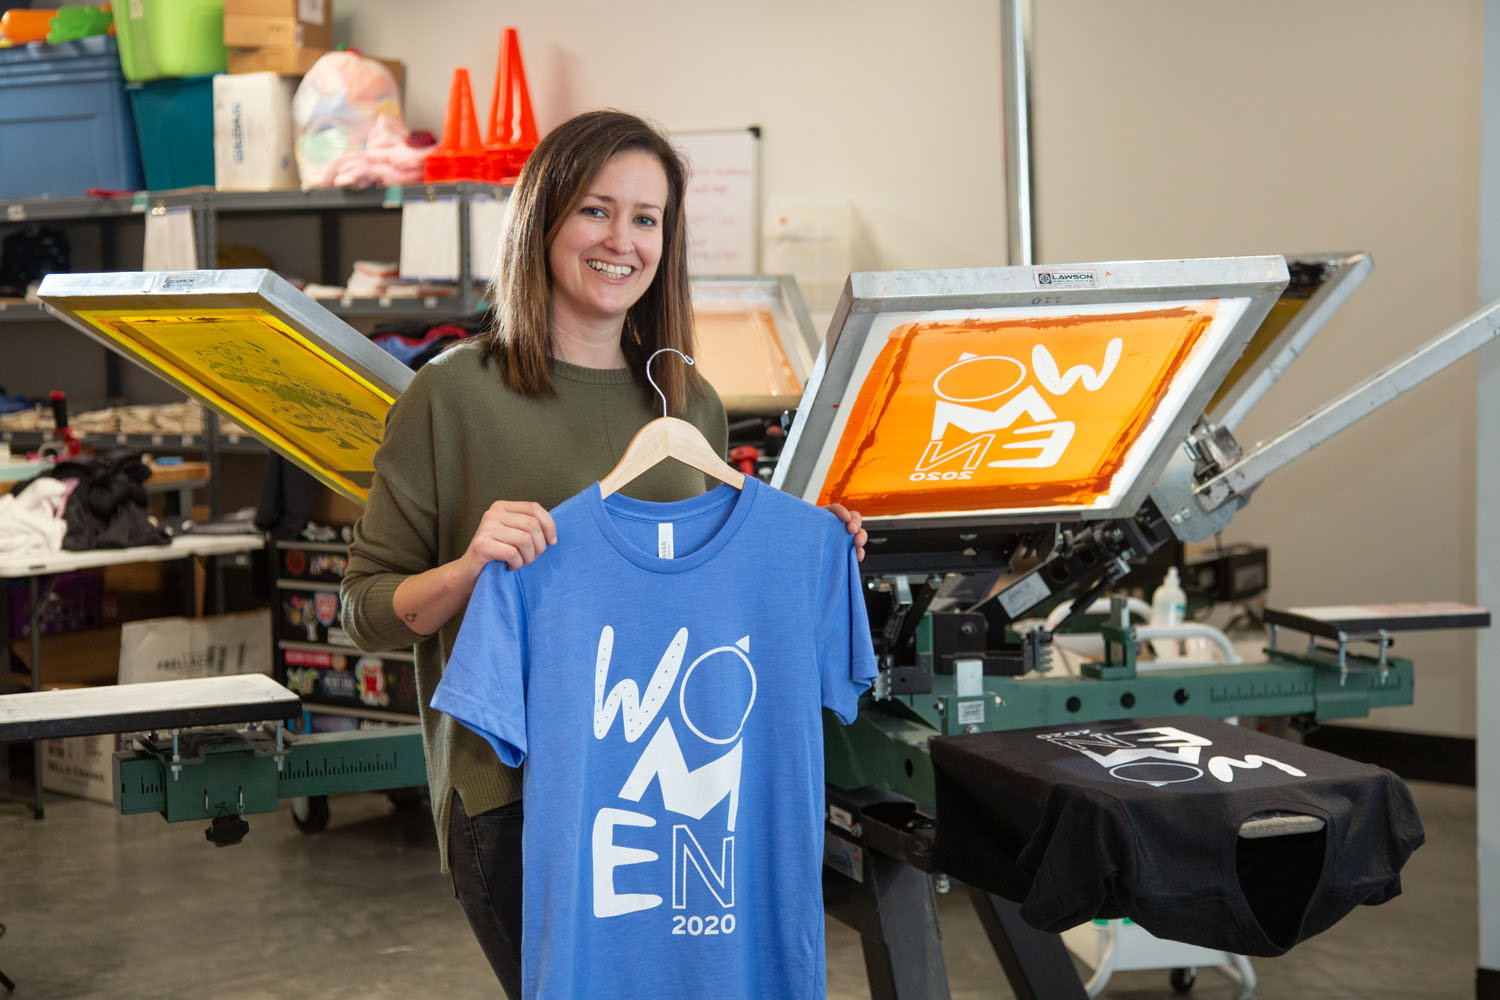 Co-owner Brittany Bilyeu helps design and print apparel.